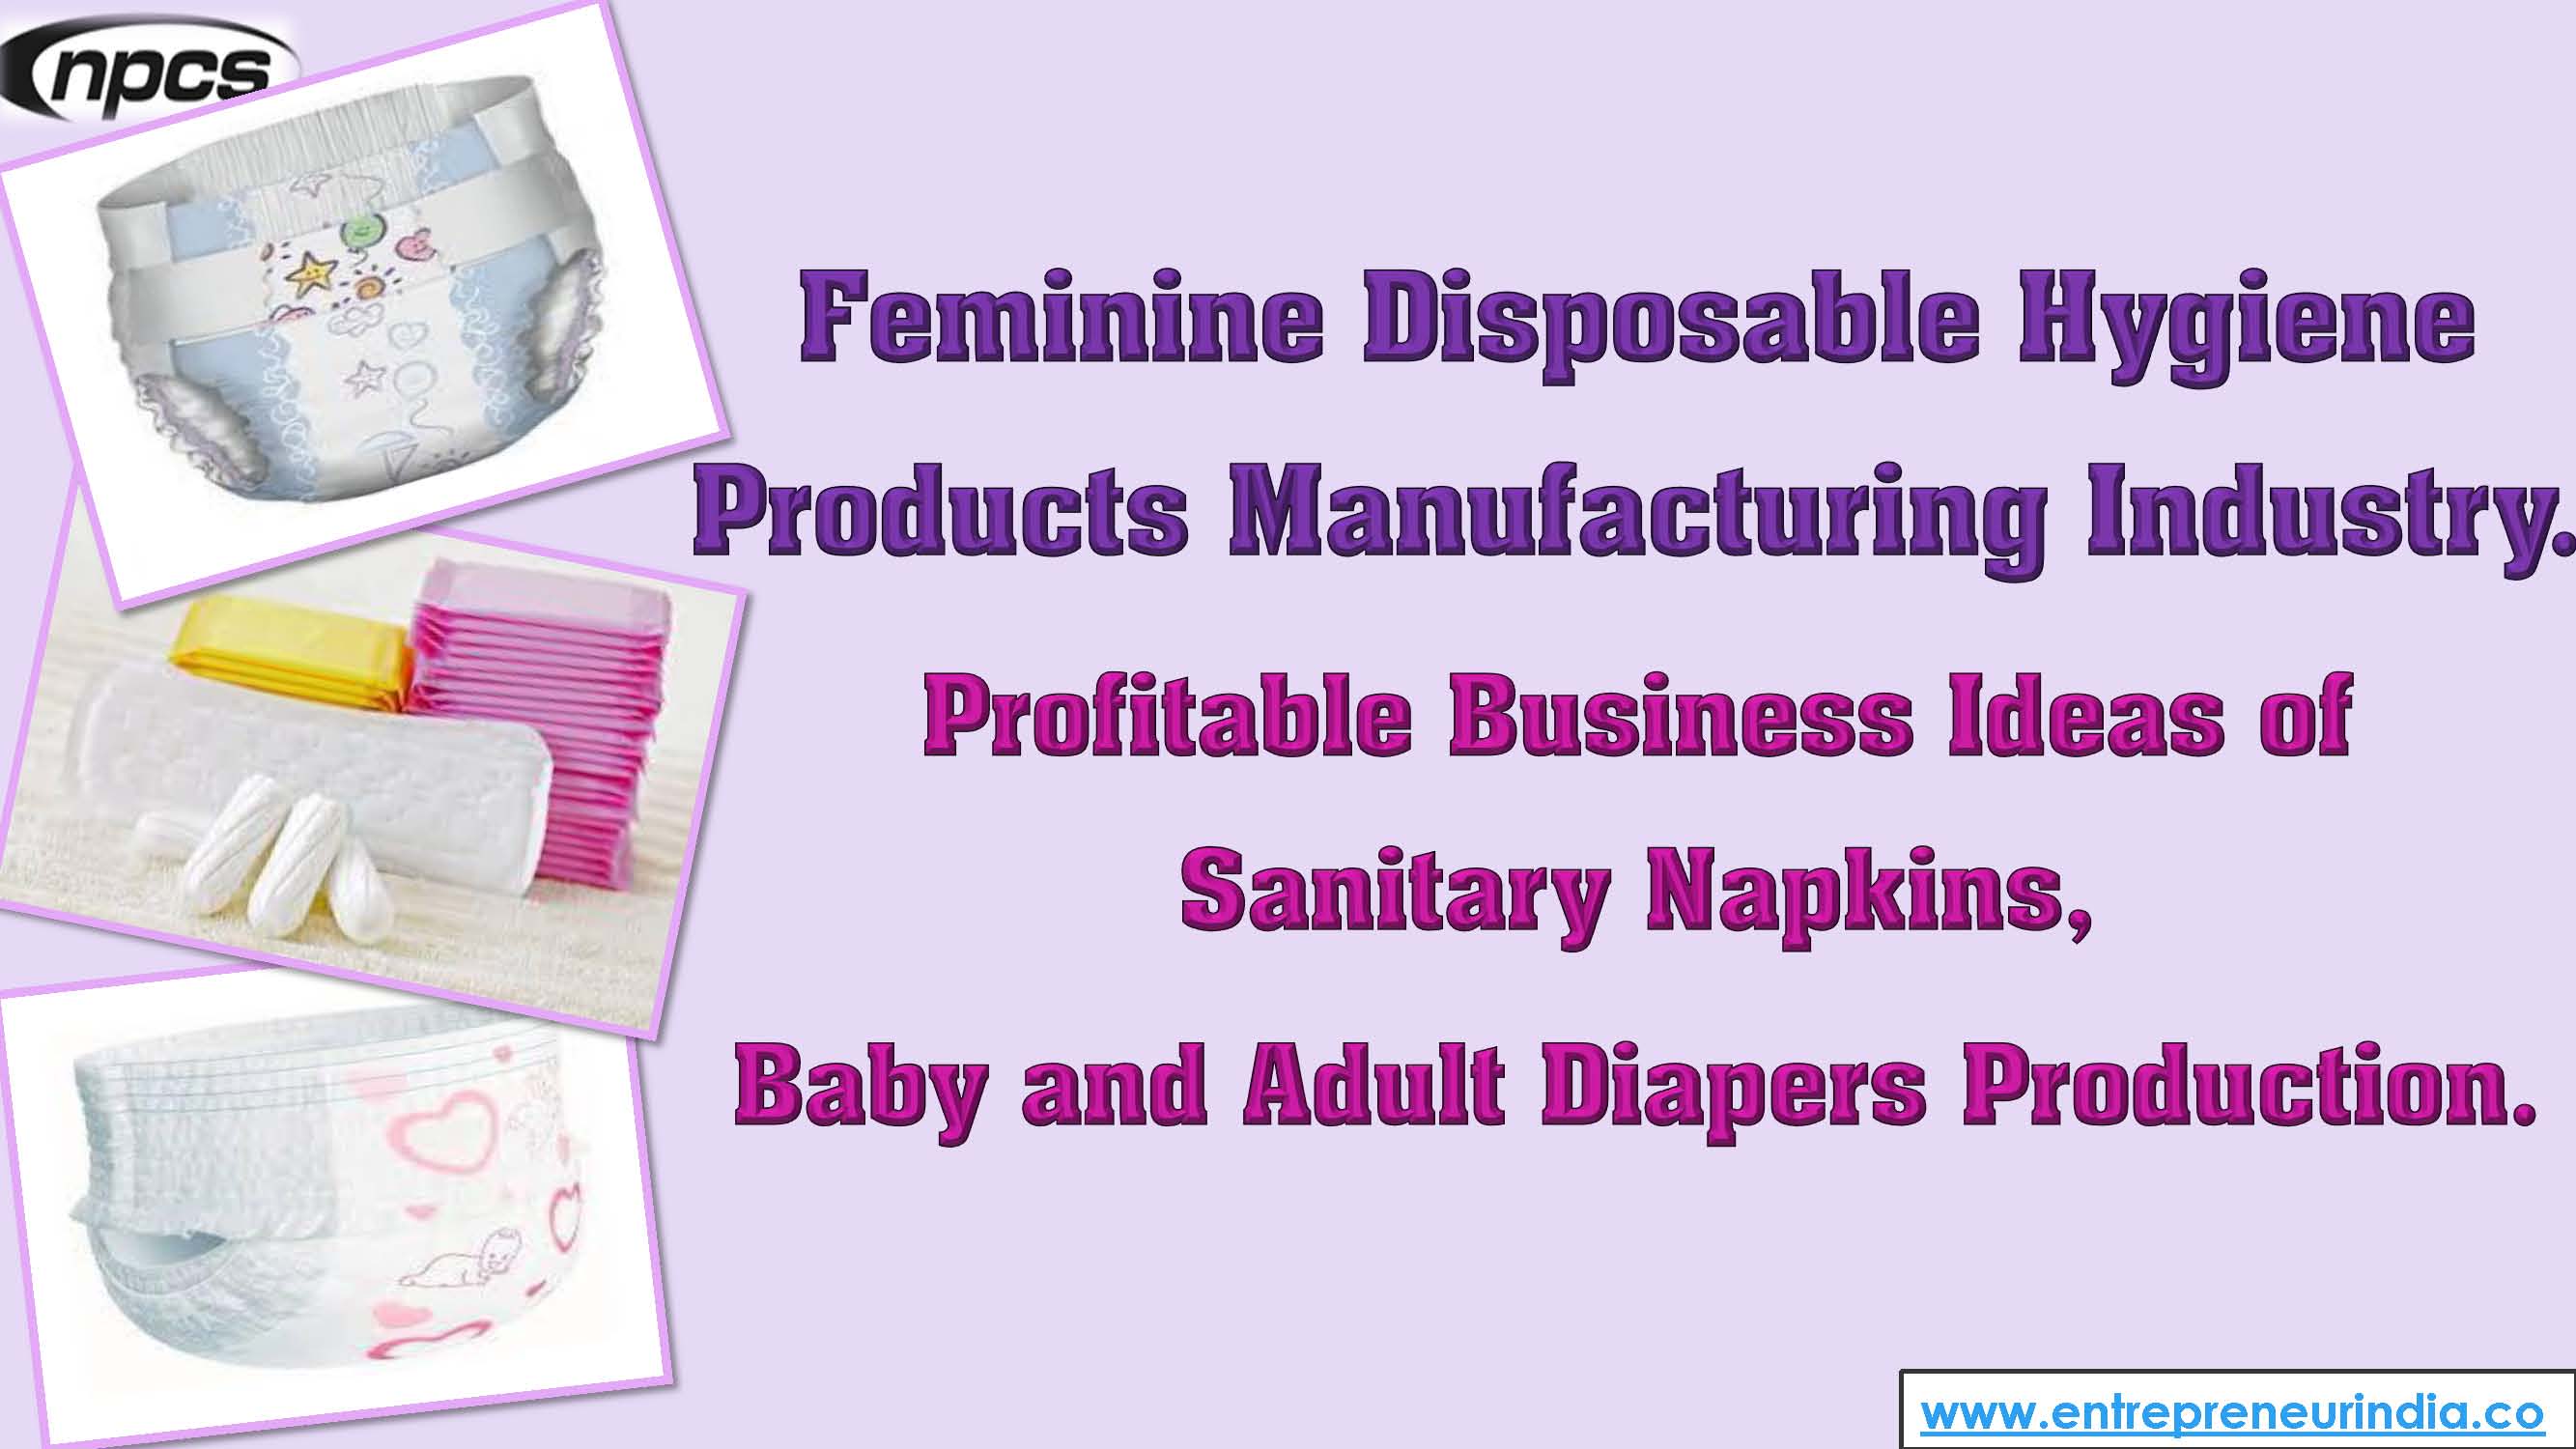 Feminine Disposable Hygiene Products Manufacturing Industry.jpg